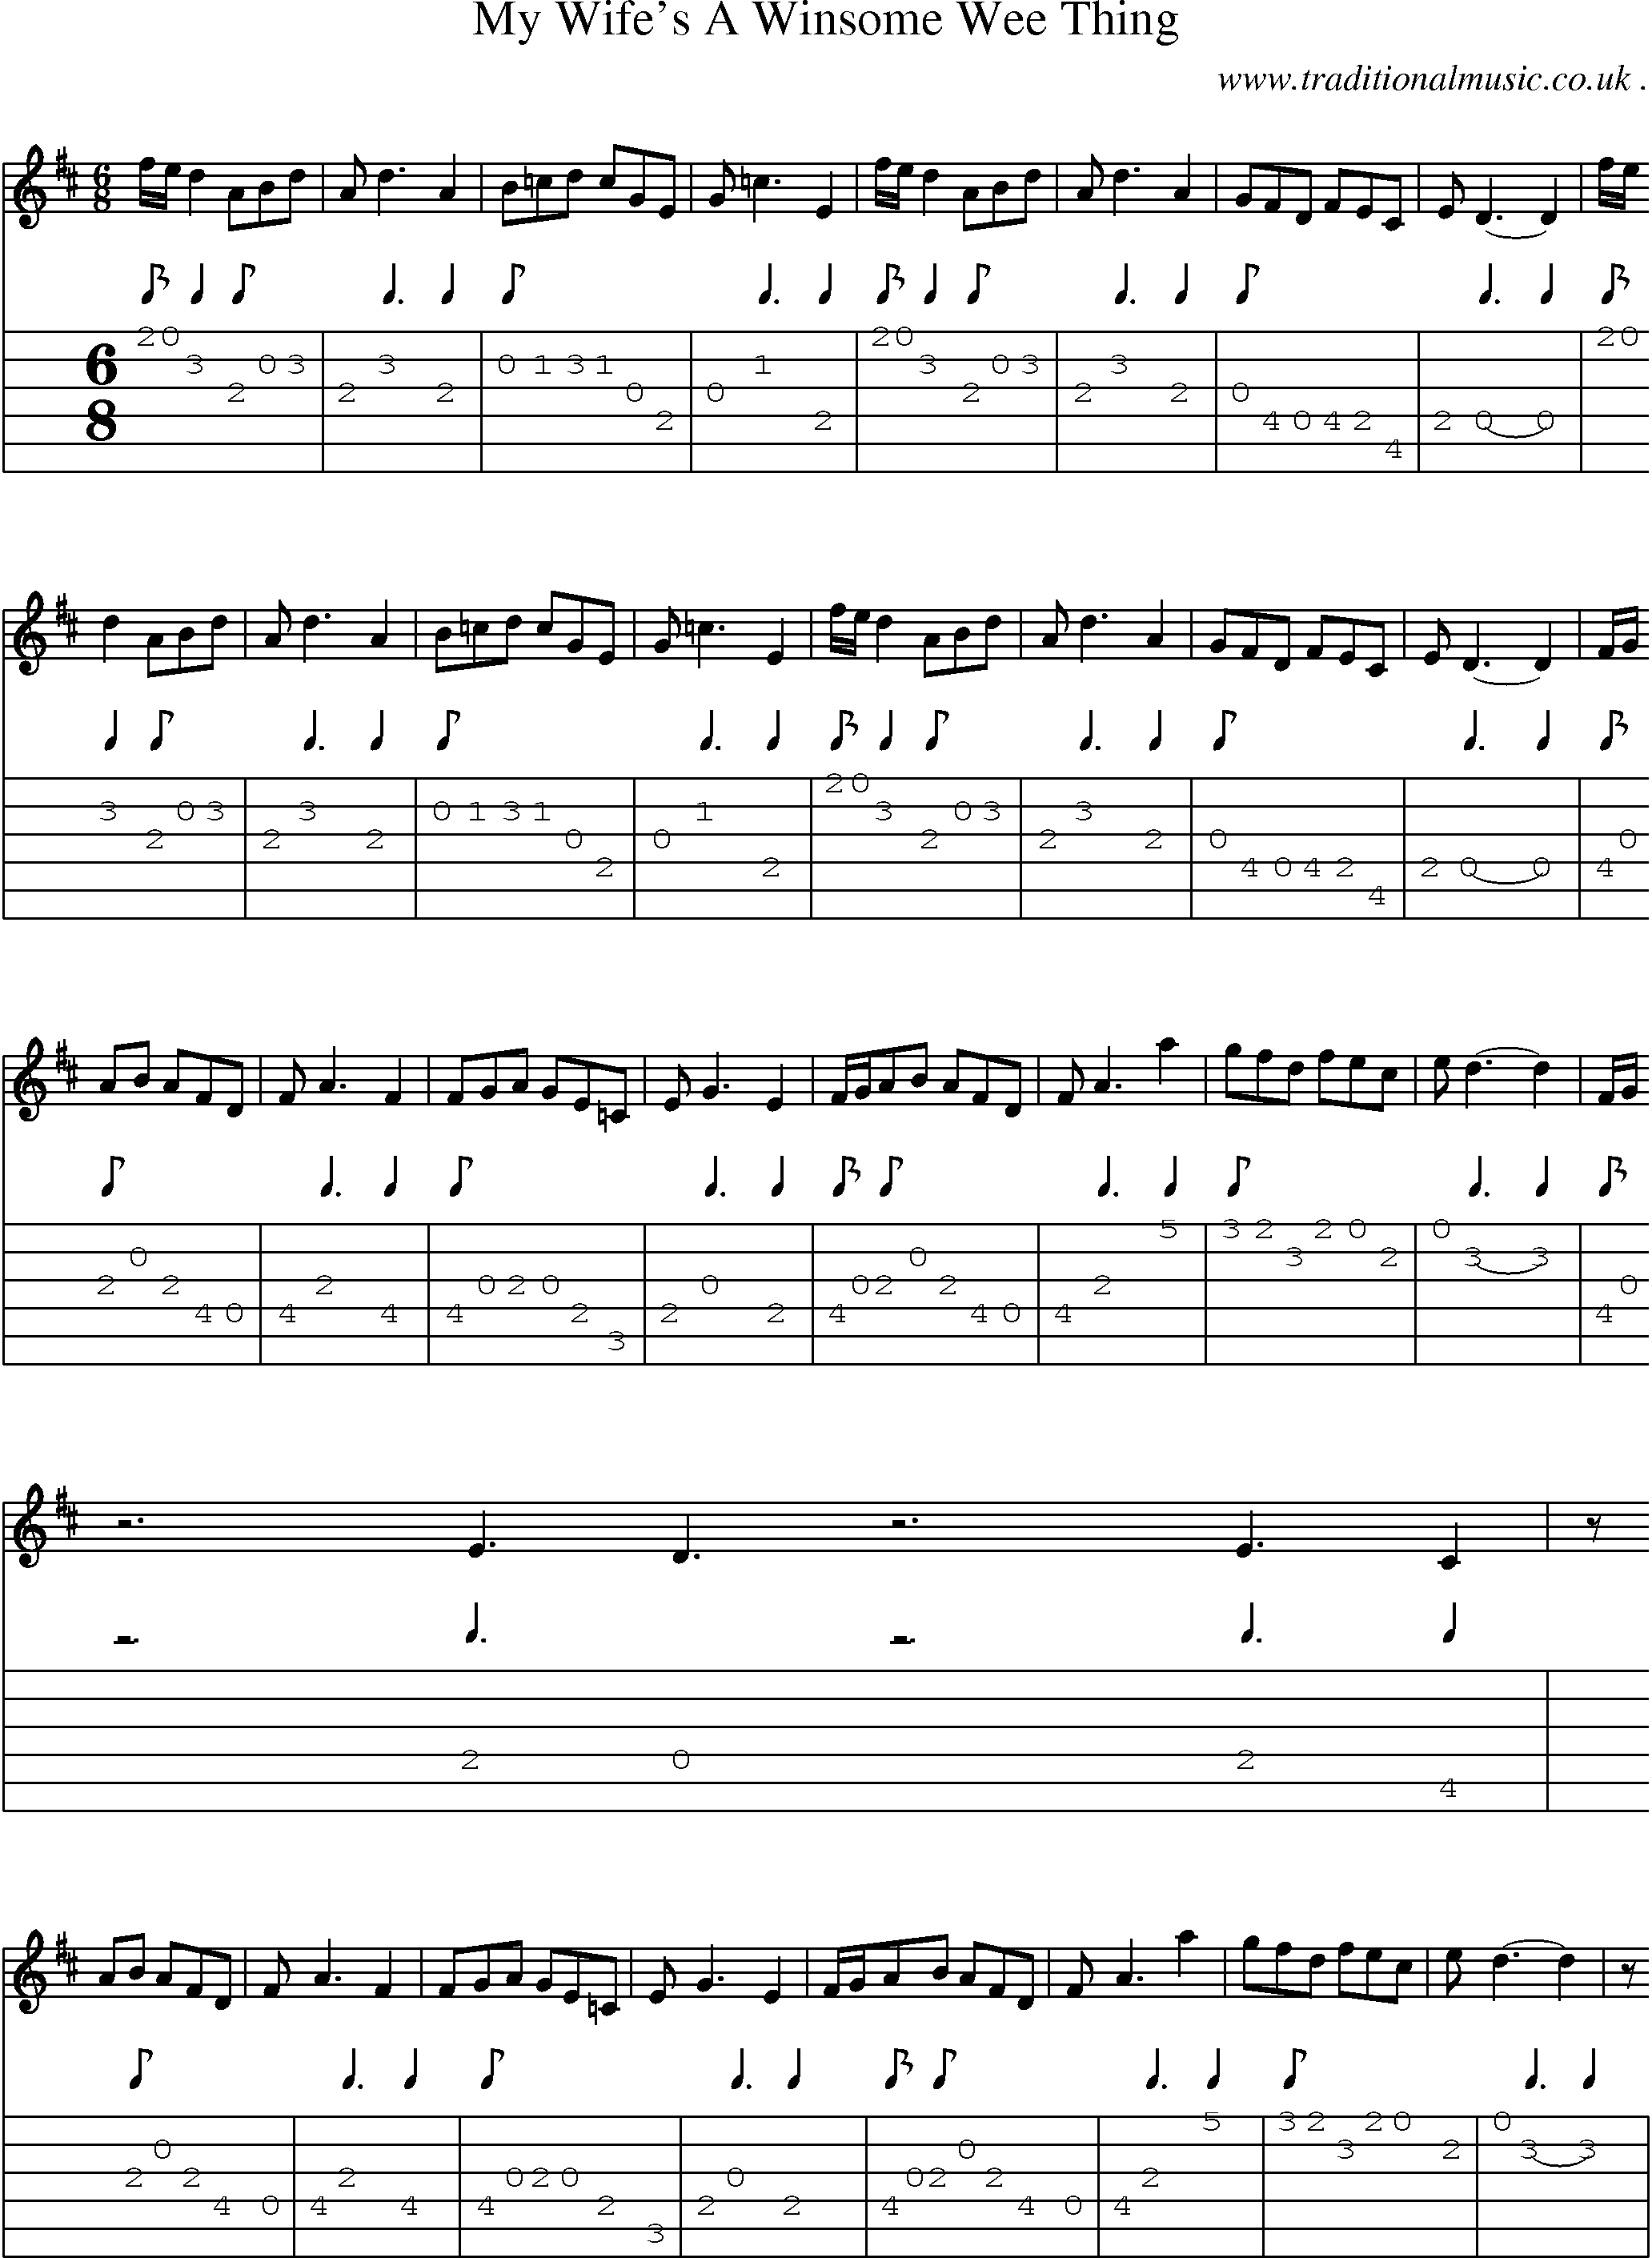 Sheet-music  score, Chords and Guitar Tabs for My Wifes A Winsome Wee Thing